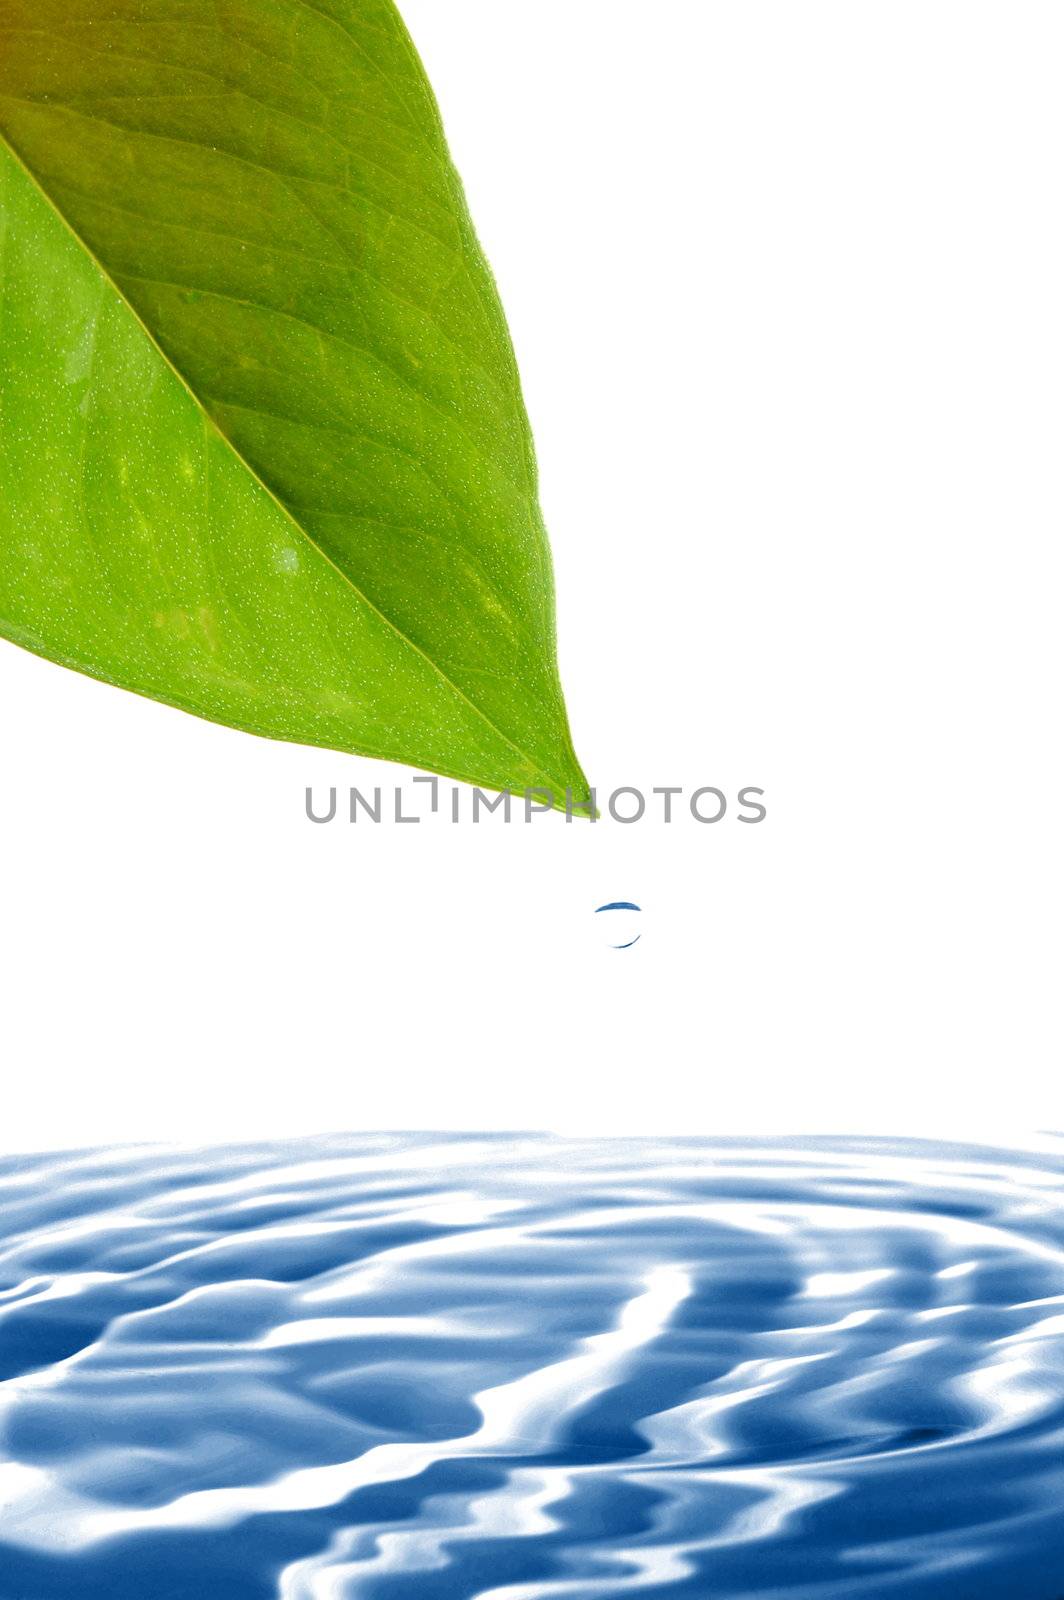 leaf and water drop showing healthy lifestyle